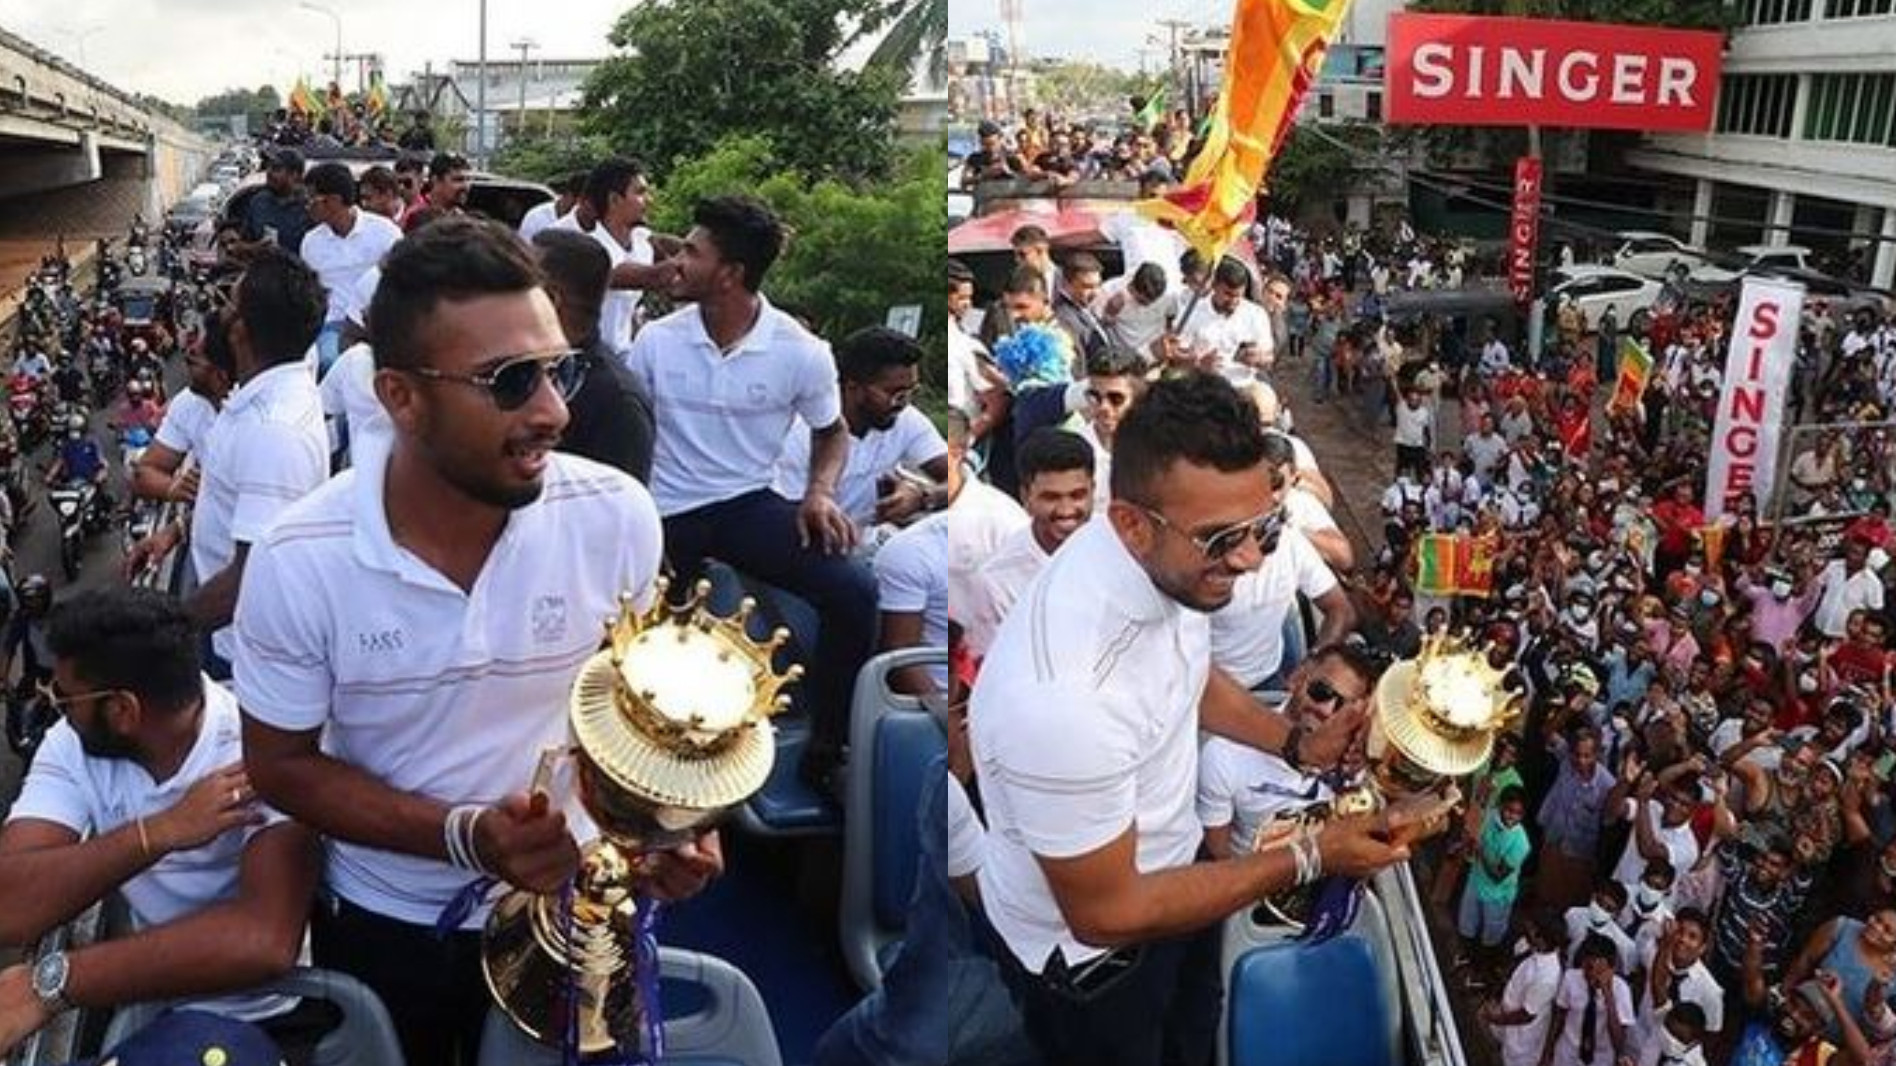 PICS- Sri Lankan team get massive victory parade at home after Asia Cup 2022 win